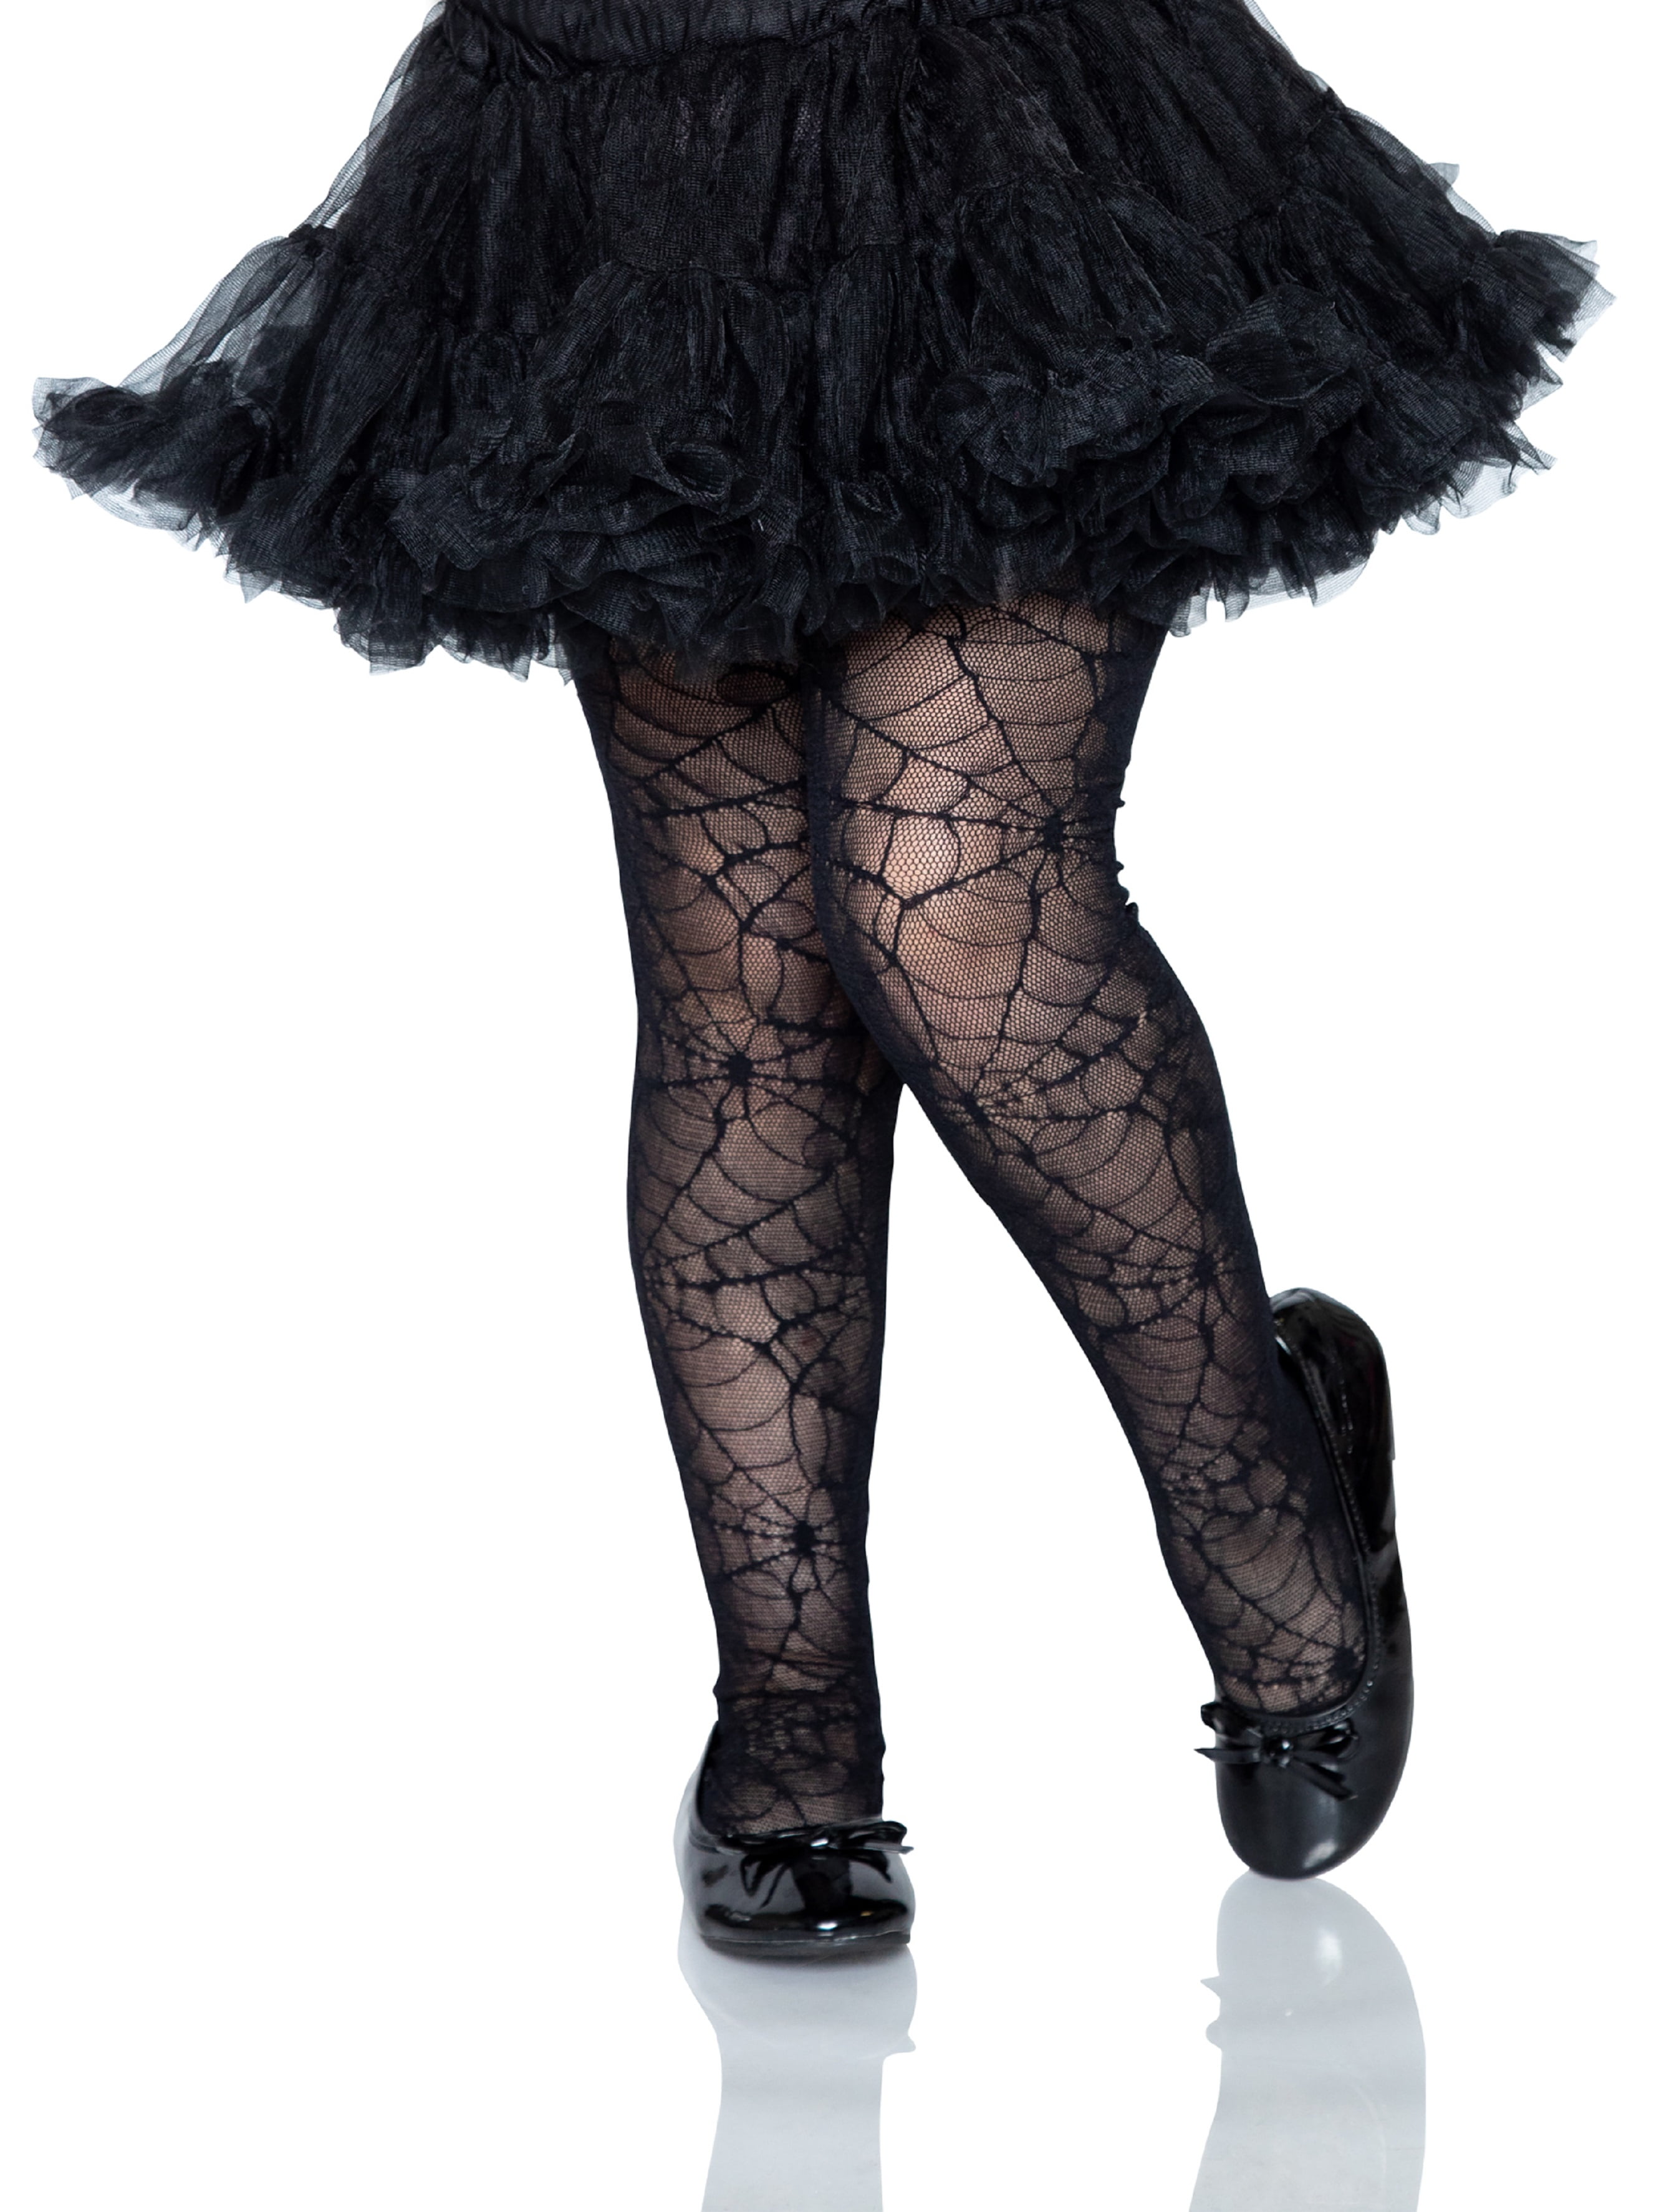 Get your Spider Tights for Halloween ASAP - UK Tights Blog